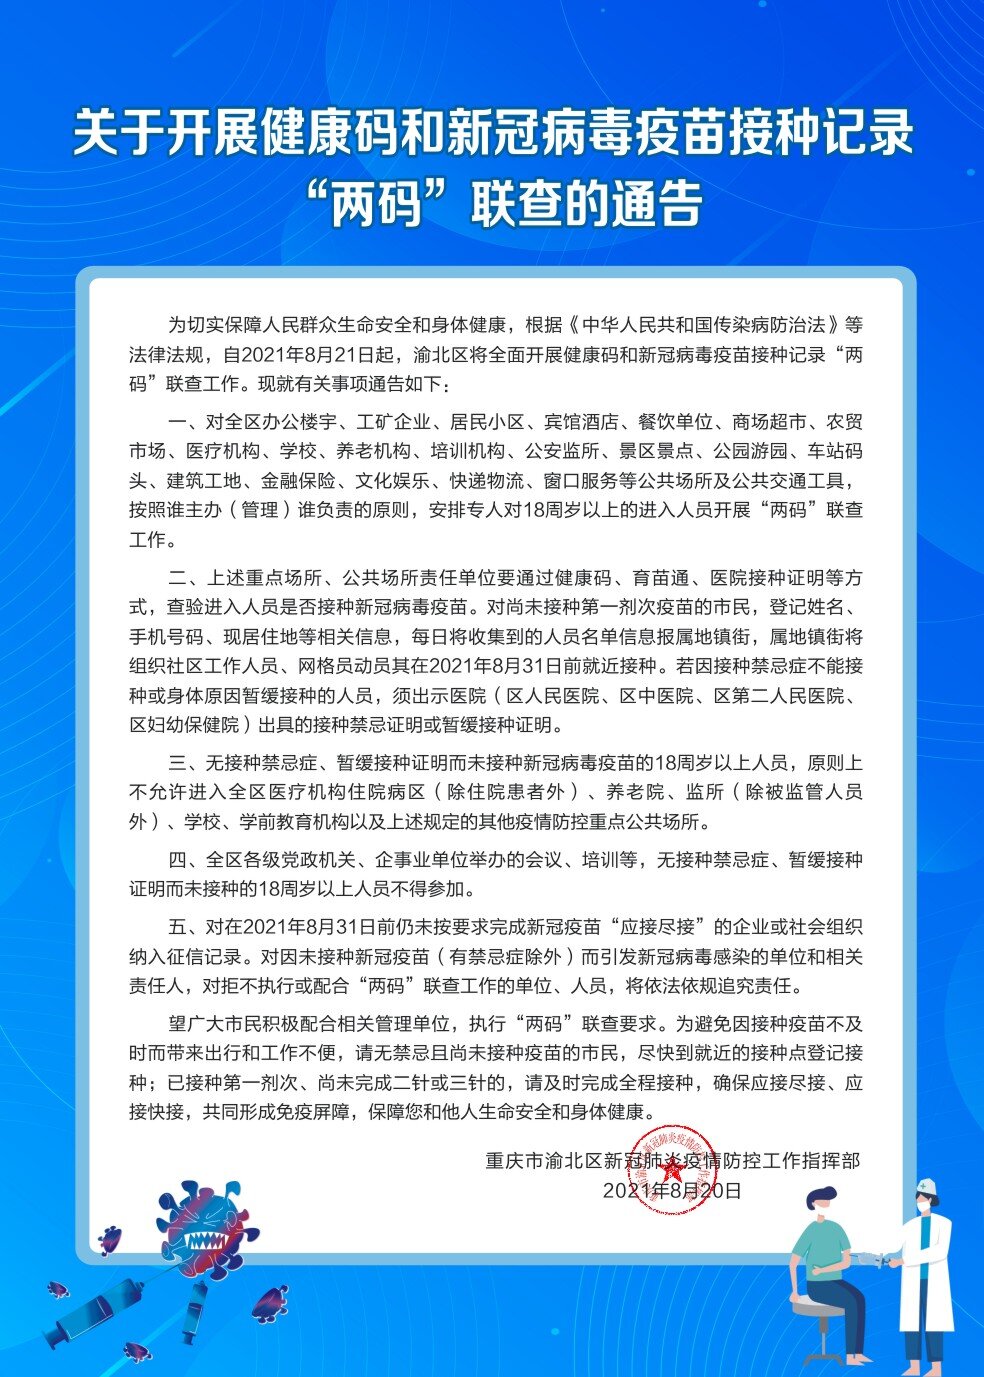 Official Notice of  Yubei District of Chongqing City issued an official notice on August 20